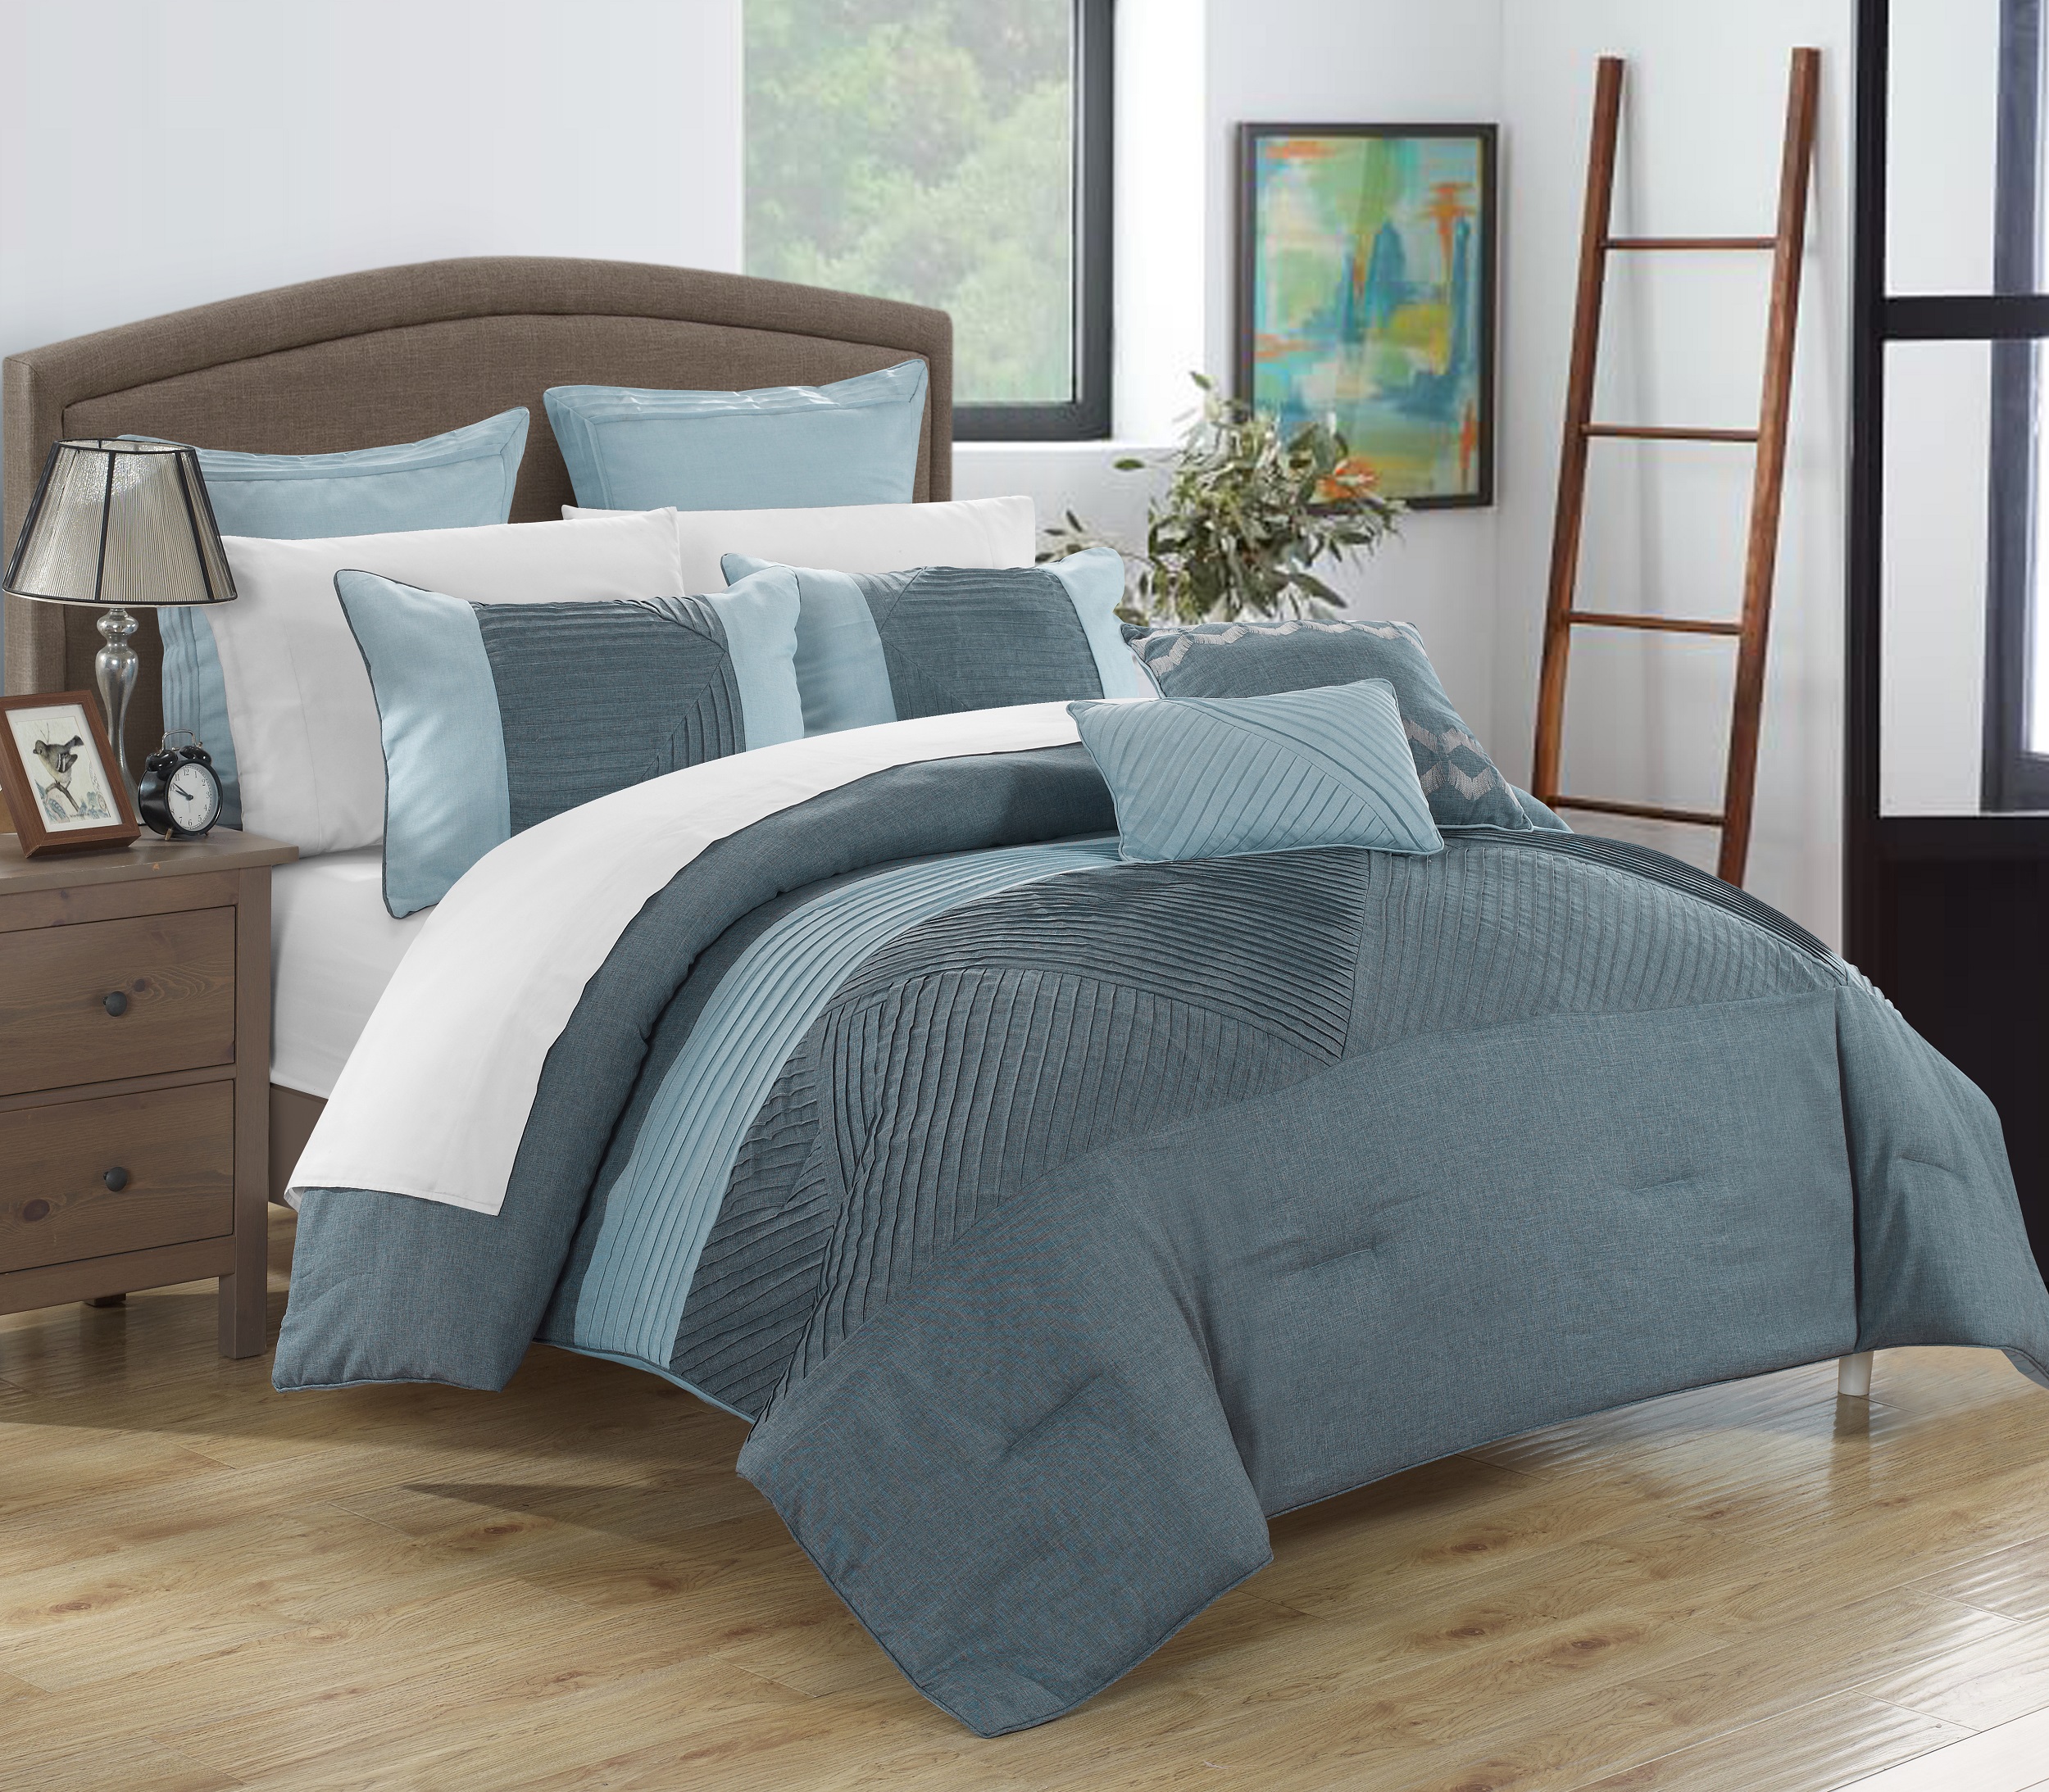 Chic Home Marbella 11 Piece FABRIC OVERSIZED AND OVERFILLED embroidered pleated ruffled color block King Comforter Blue